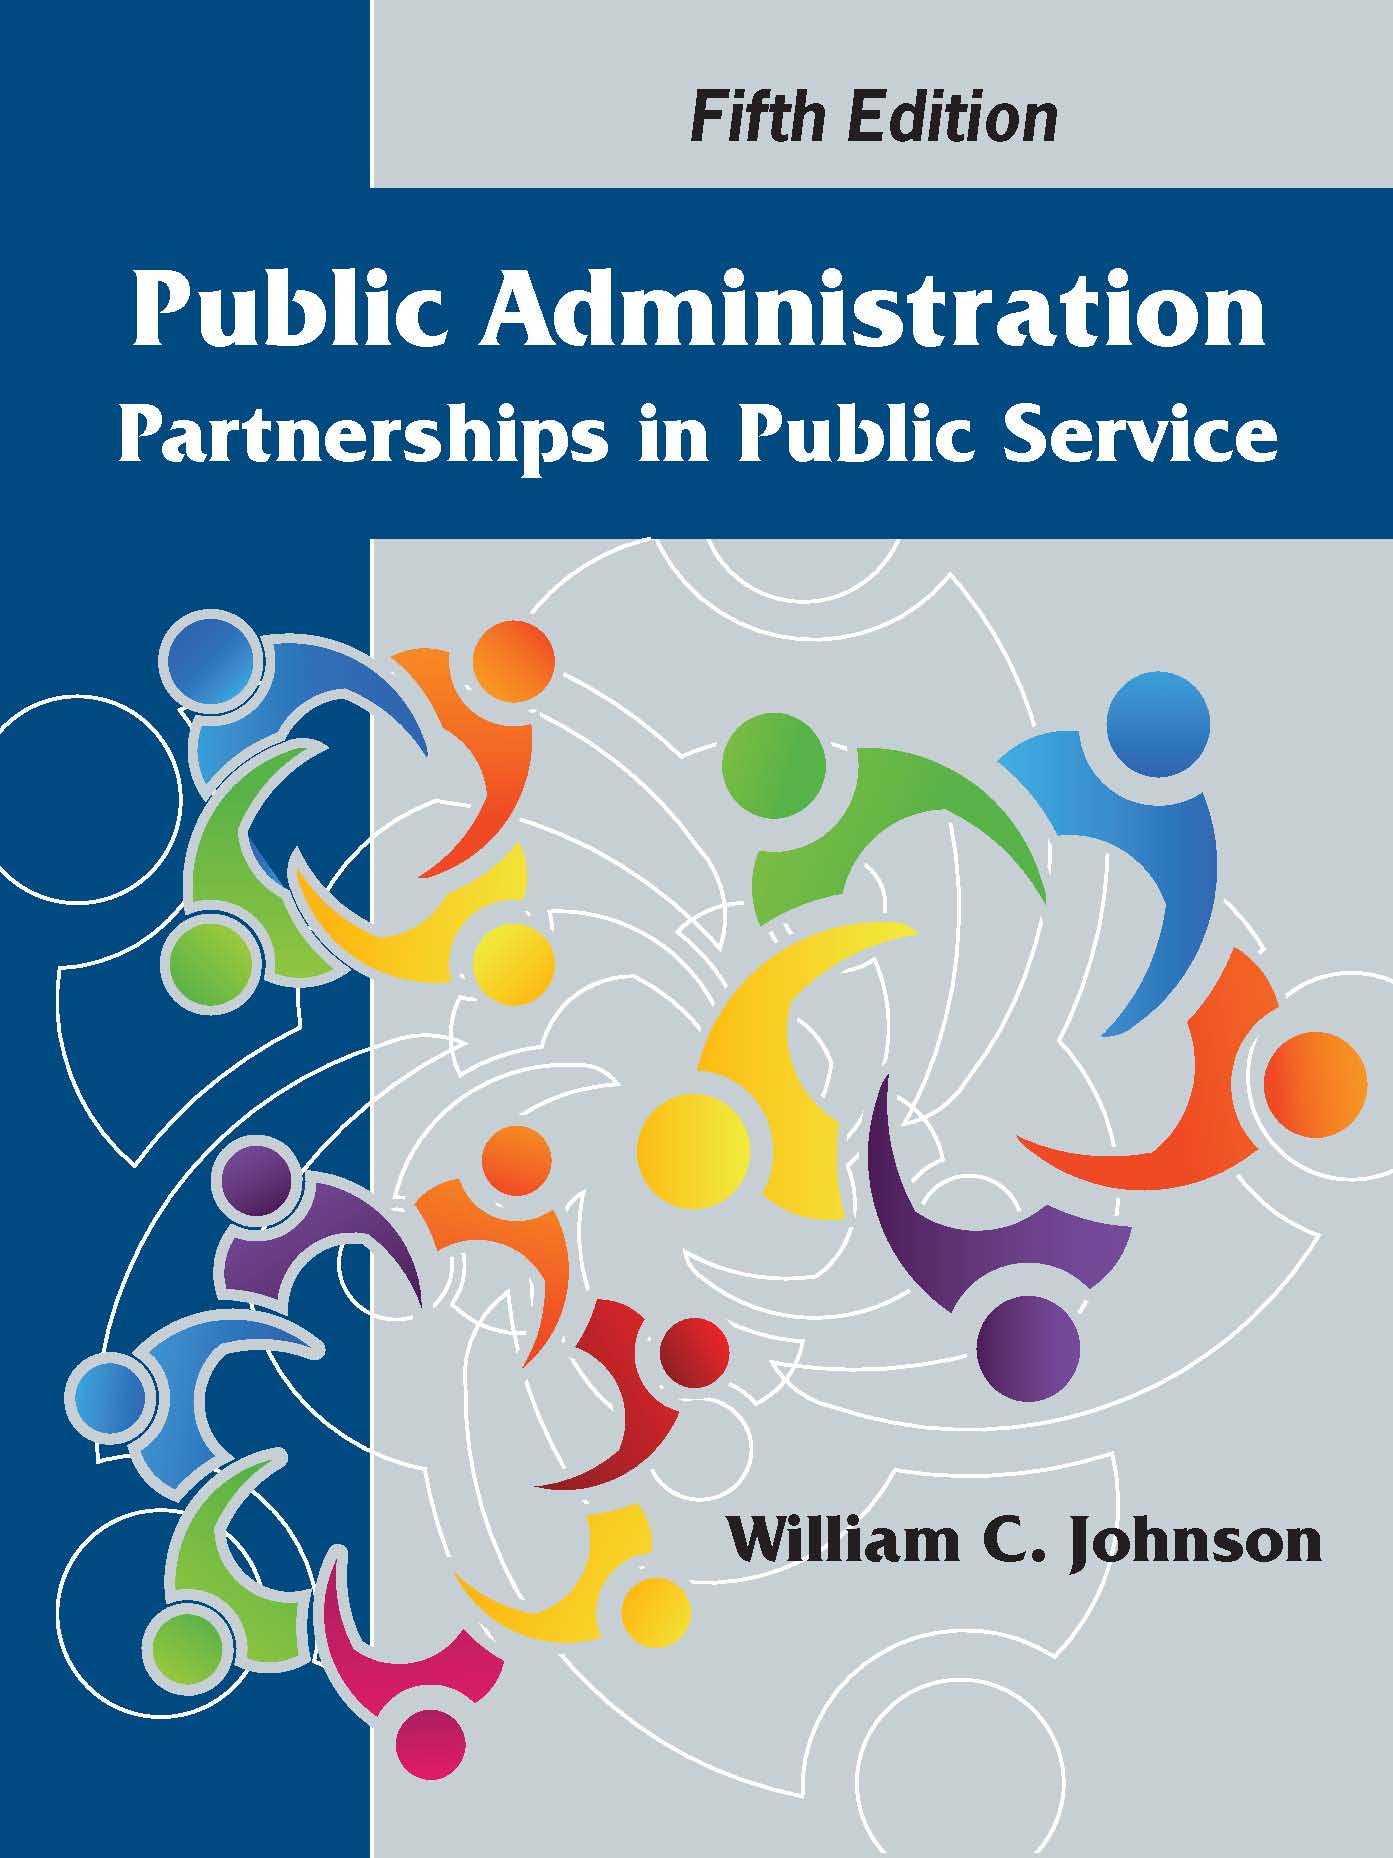 Public Administration: Partnerships in Public Service by William C. Johnson